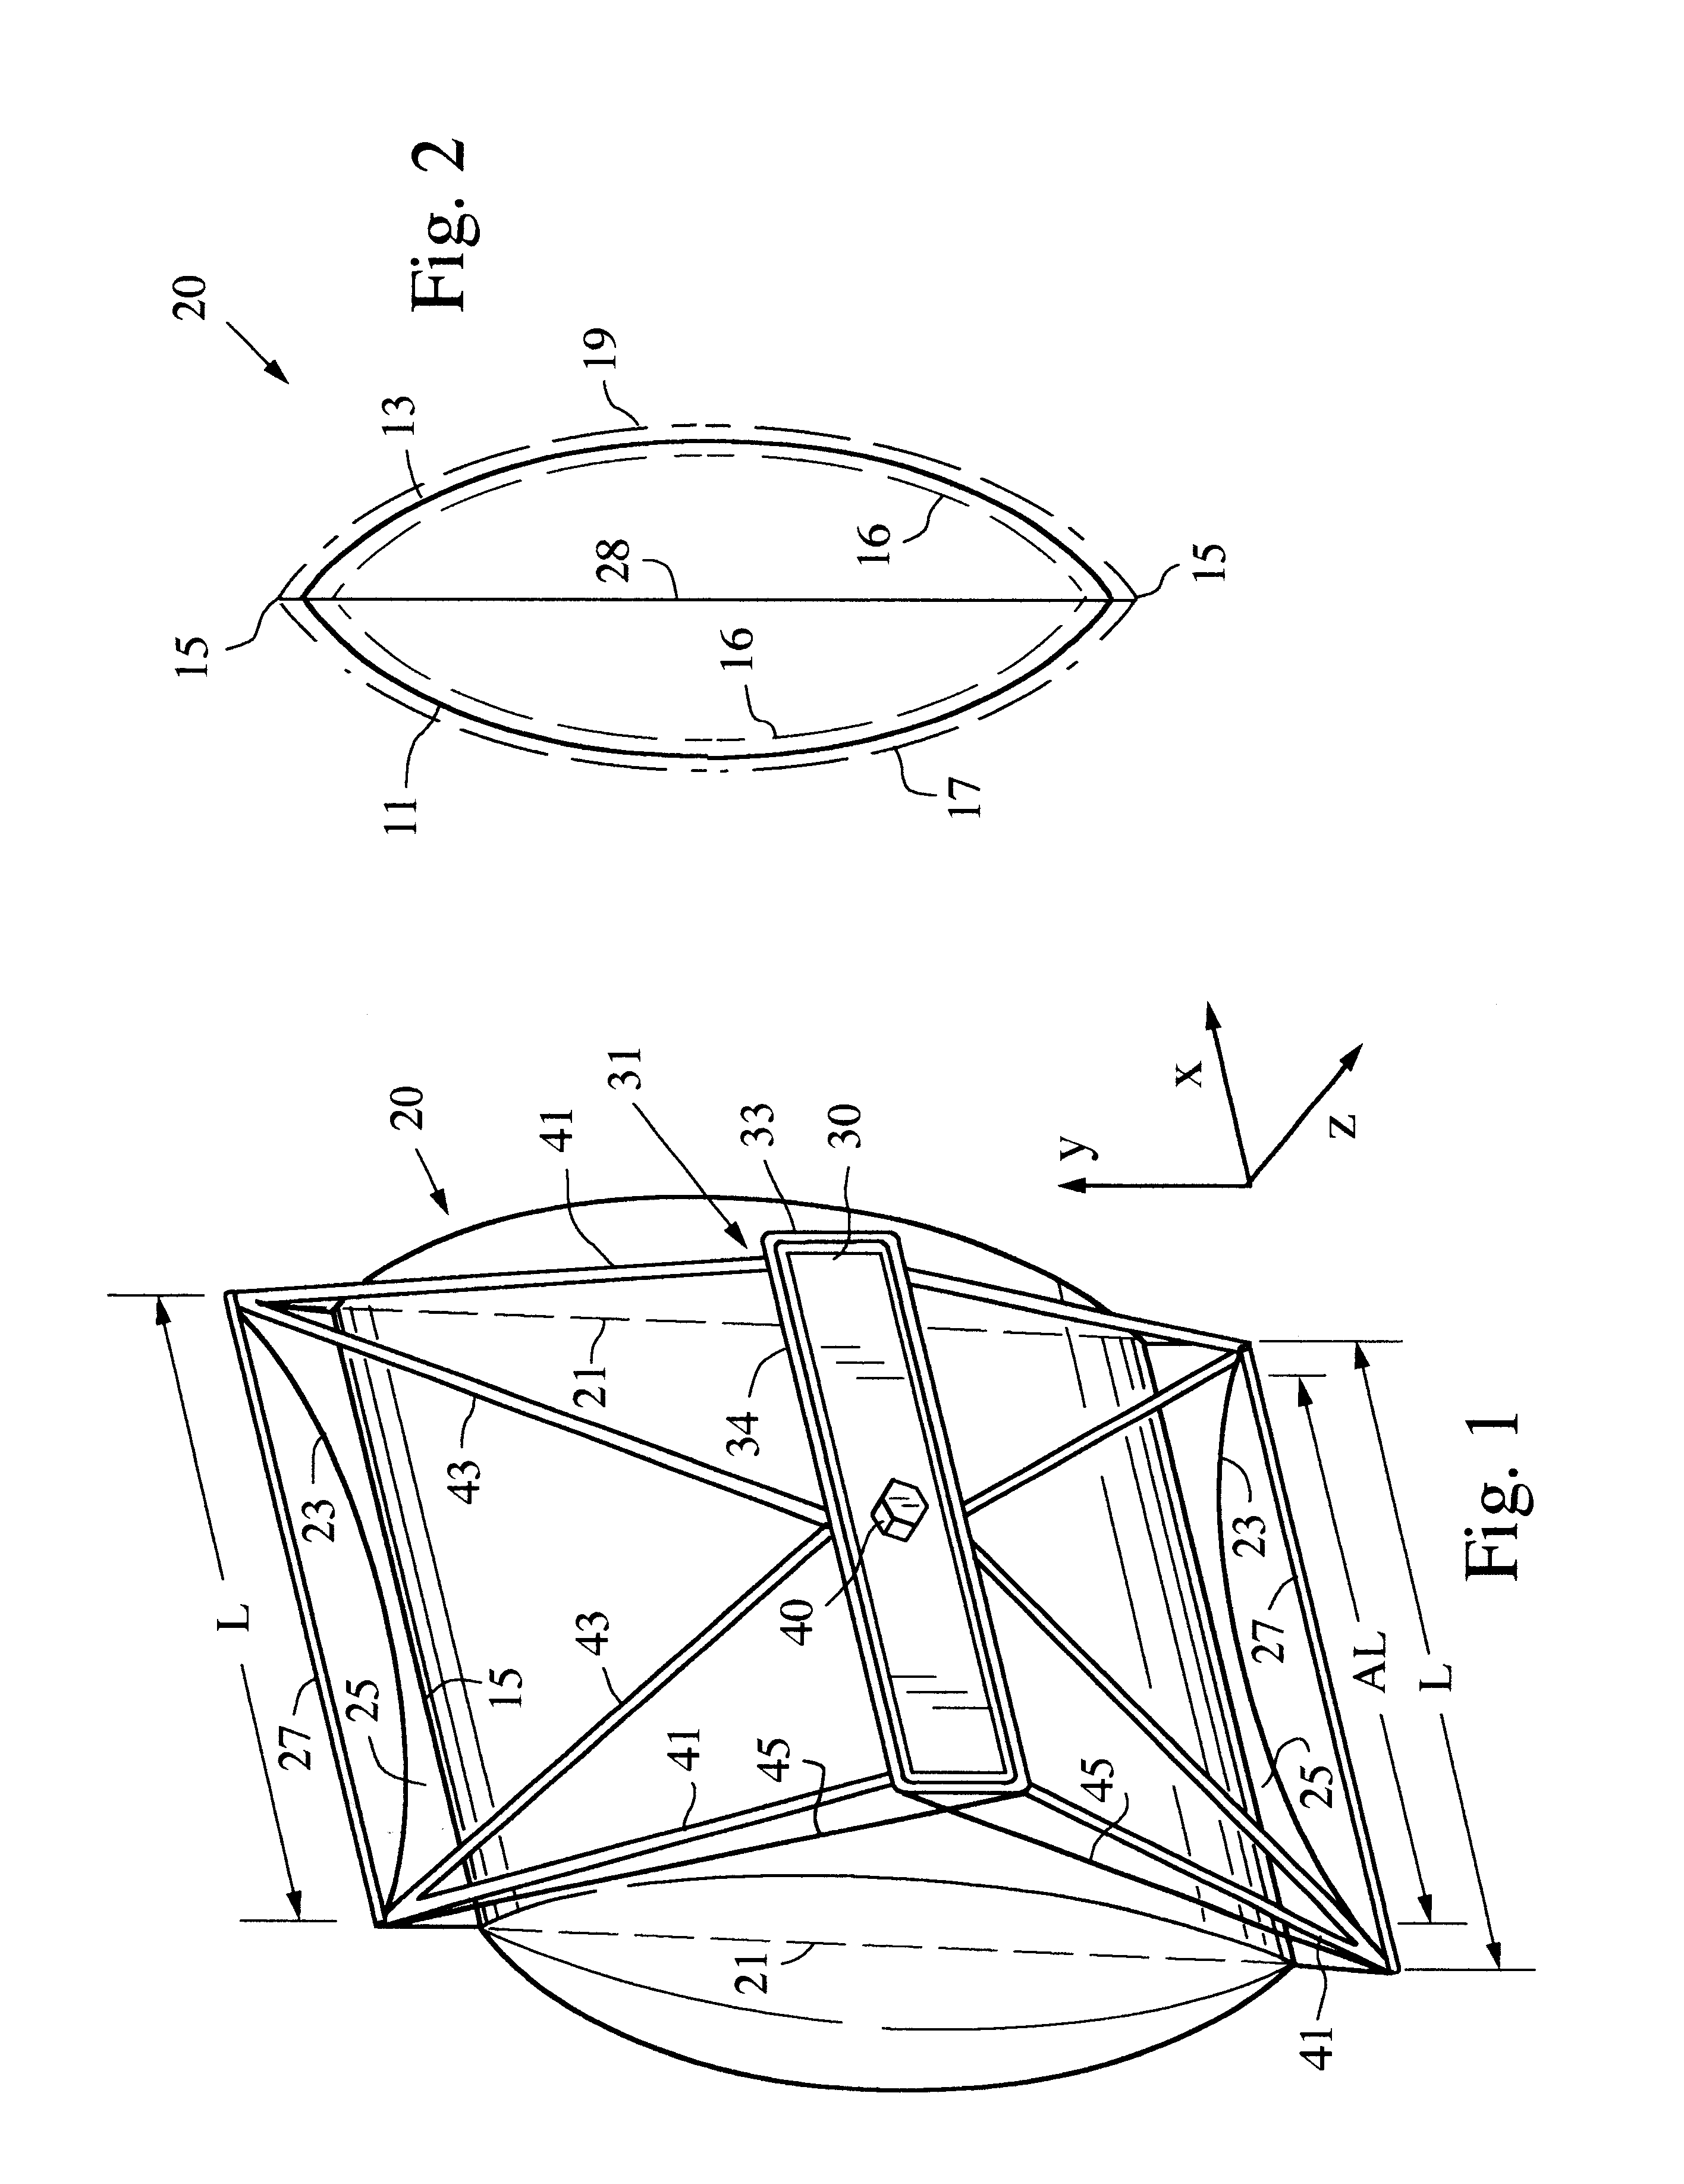 Inflatable reflector antenna for space based radars